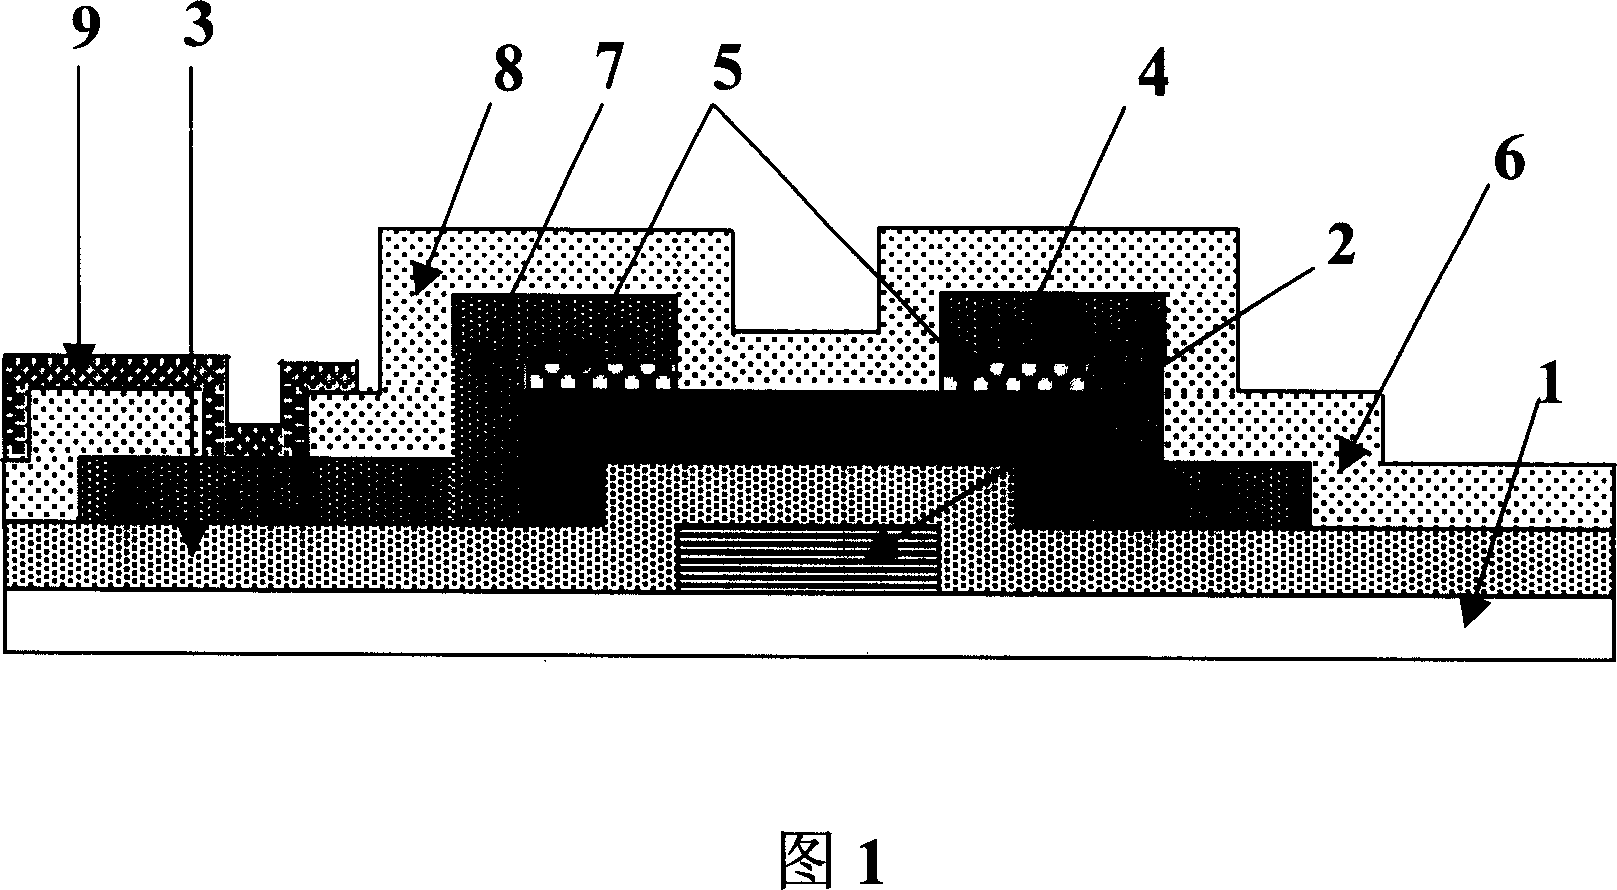 Thinfilm transistor device for reducing leaping voltage